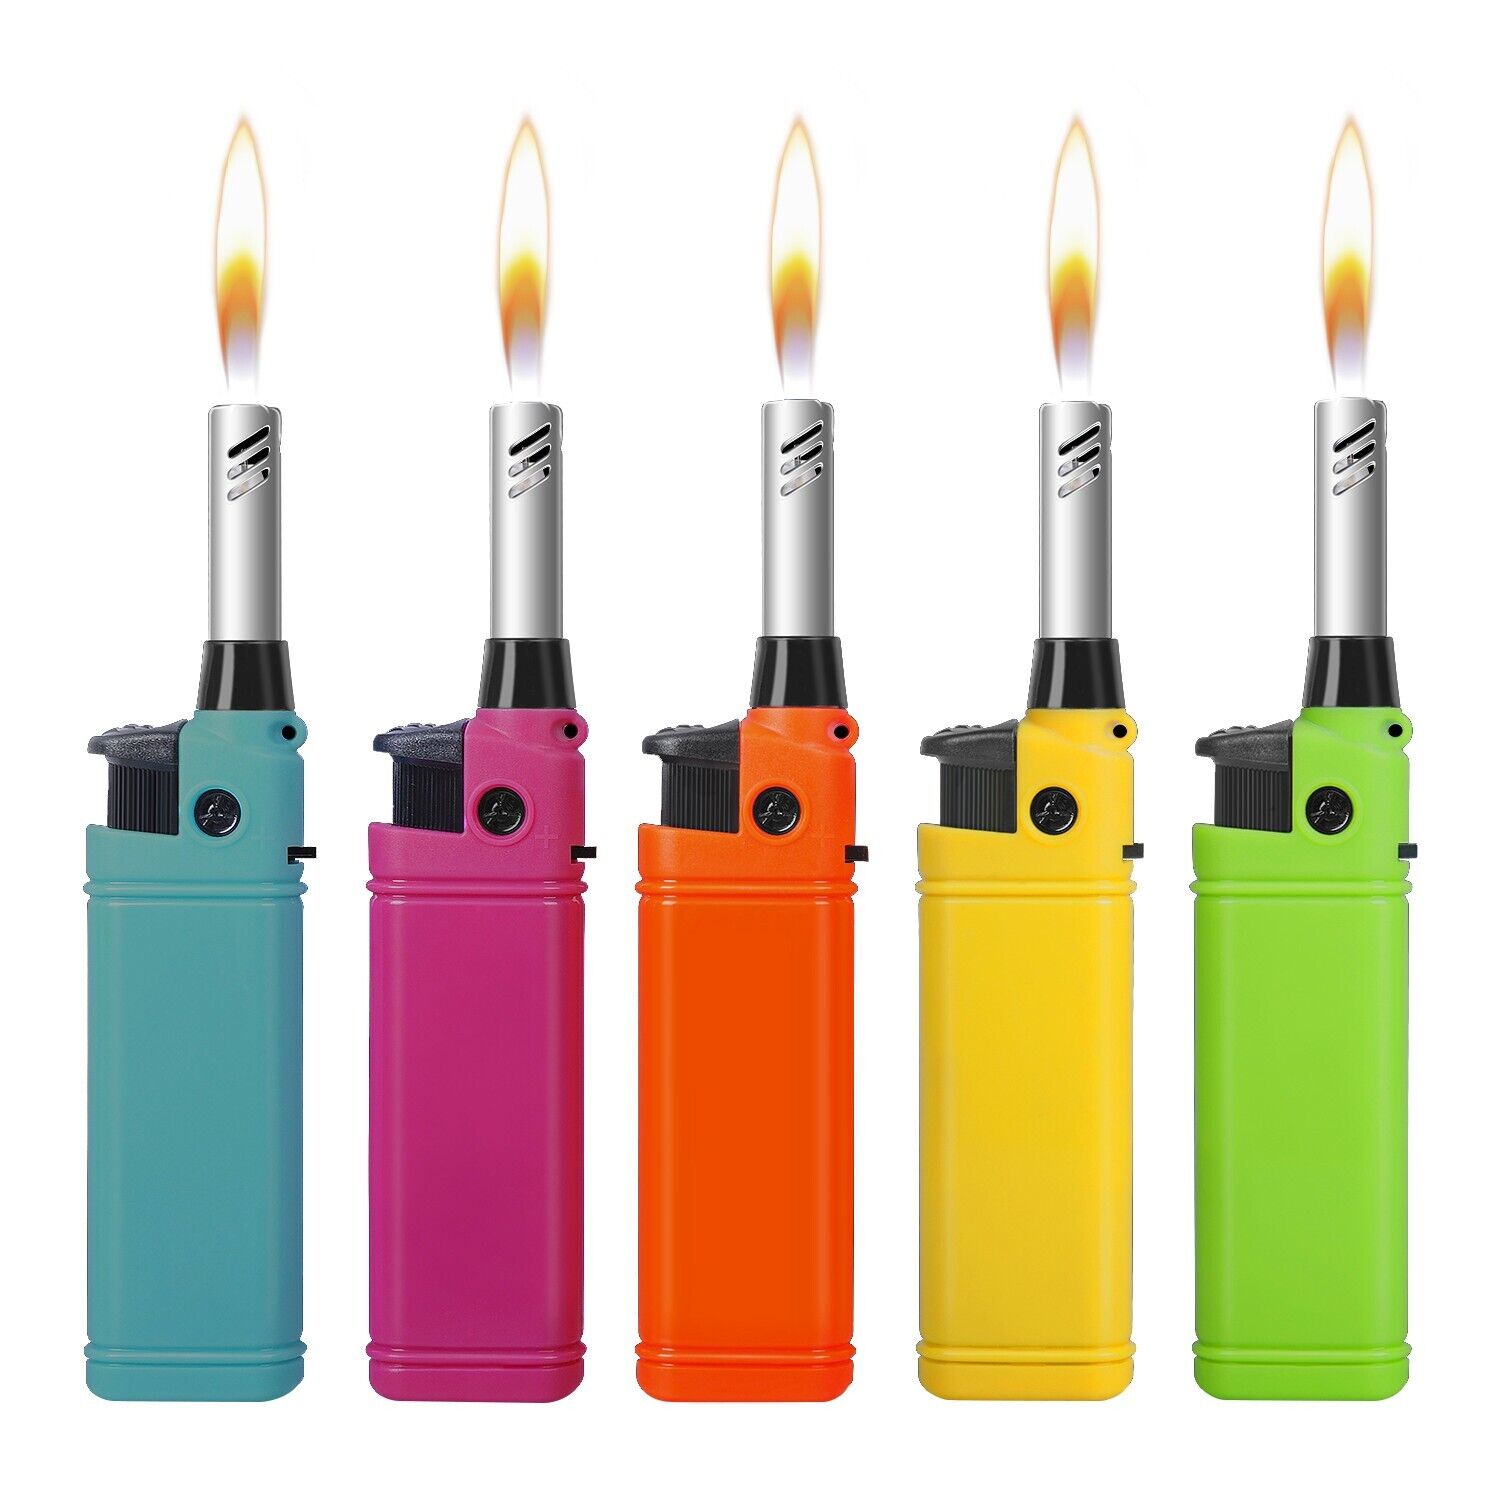 Mini Candle Lighter 5 Pack Refillable Long Neck Butane Gas Lighters for Stove Без бренда - фотография #3